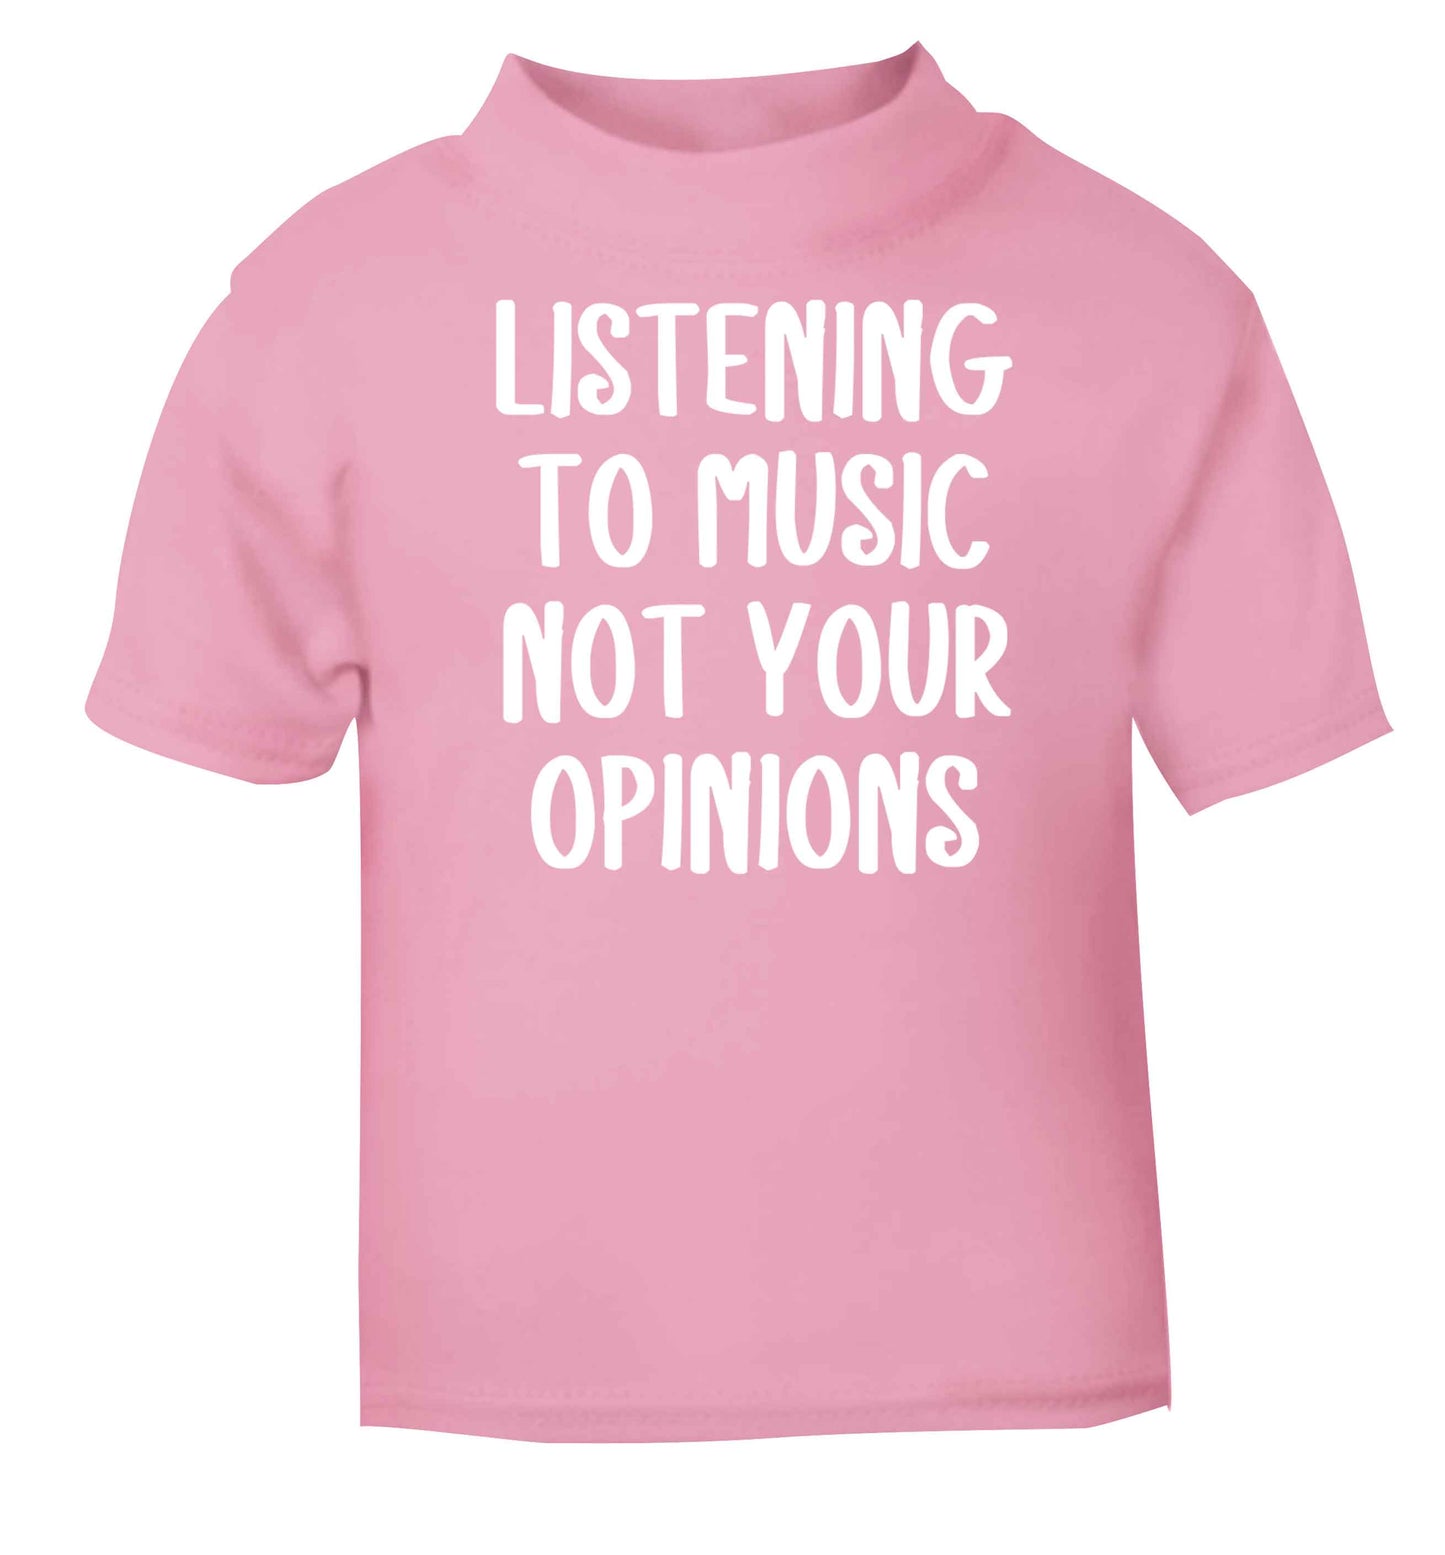 Listening to music not your opinions light pink baby toddler Tshirt 2 Years